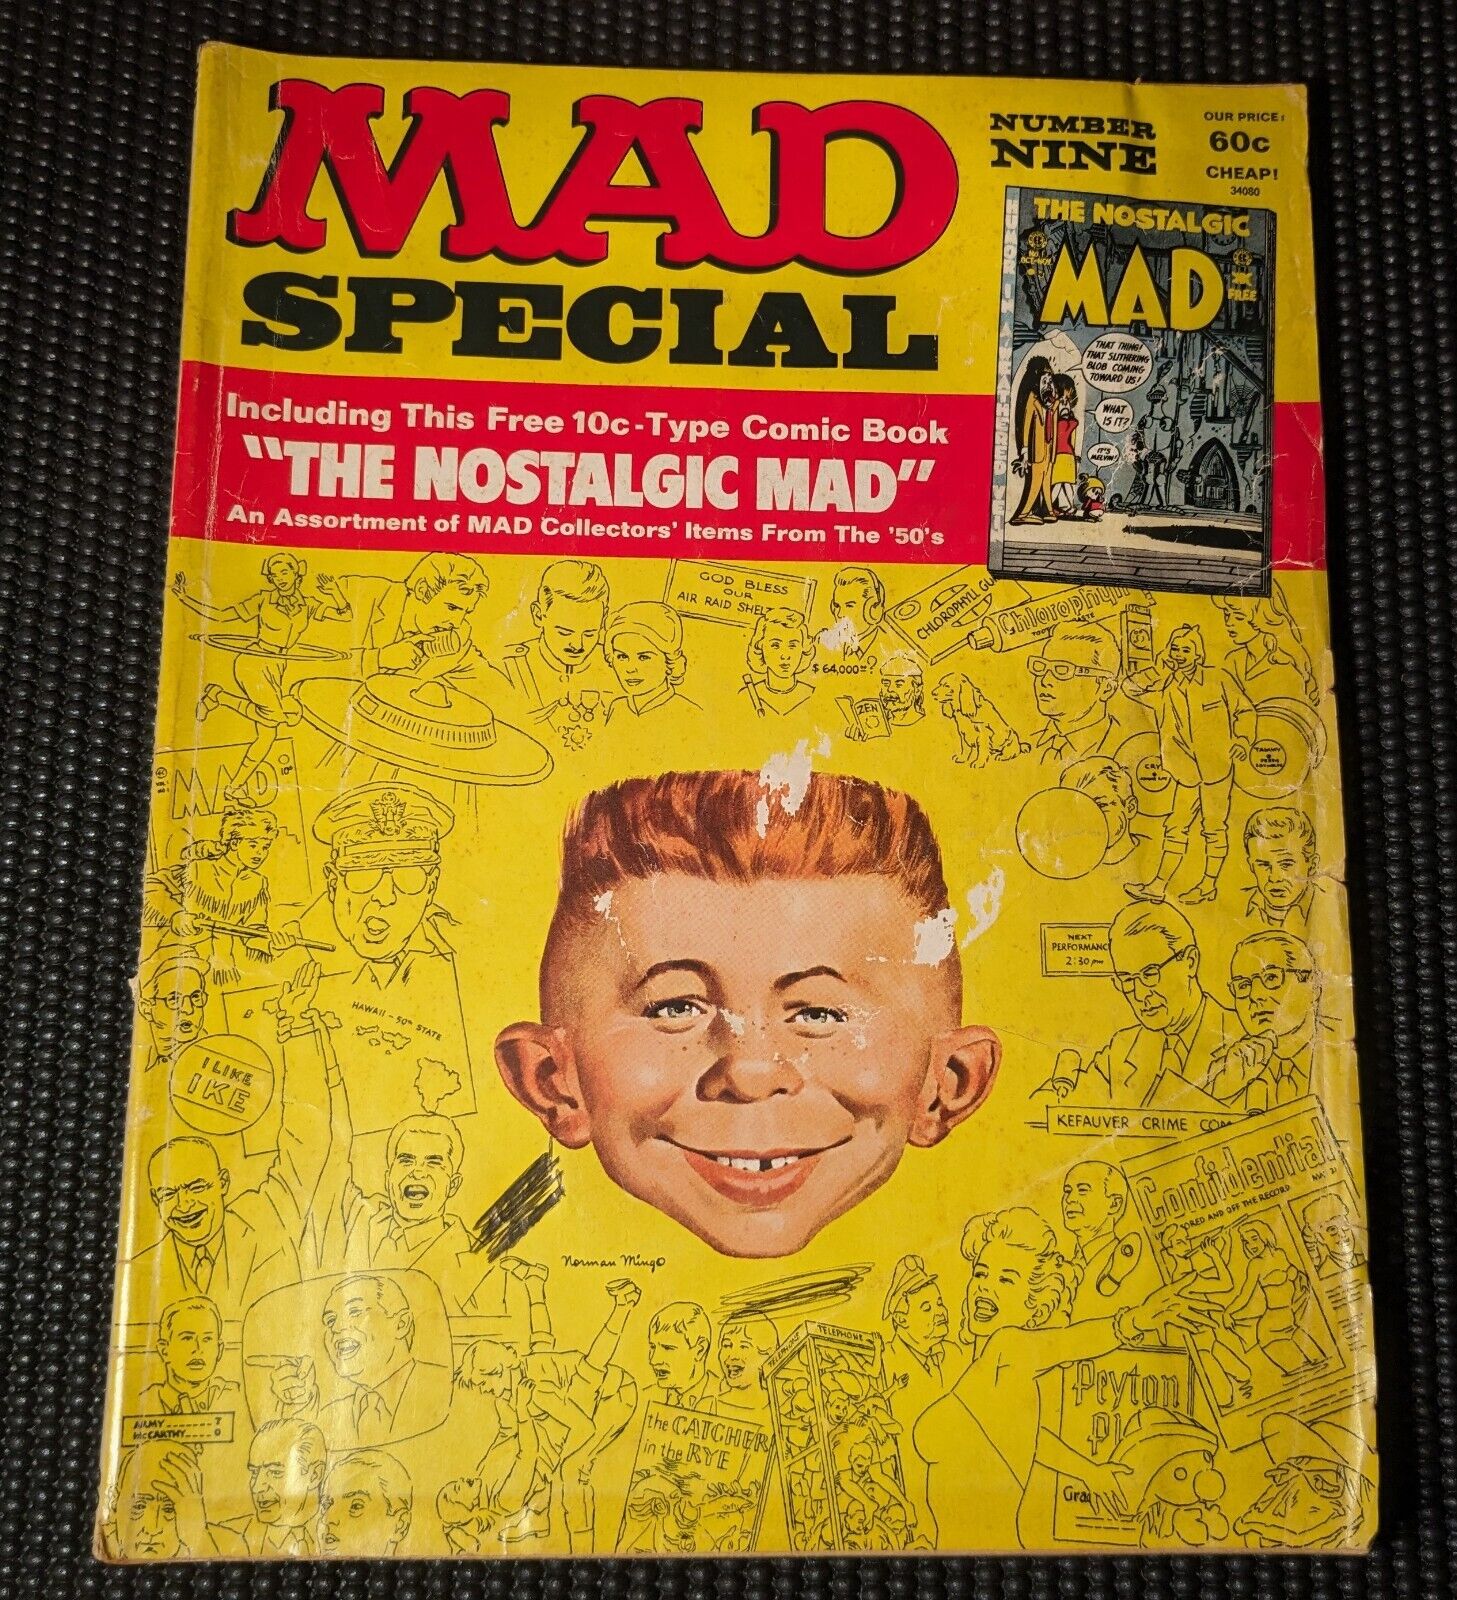 Vintage 1972 MAD Magazine - Special Number Nine With The Nostalgic MAD Insert